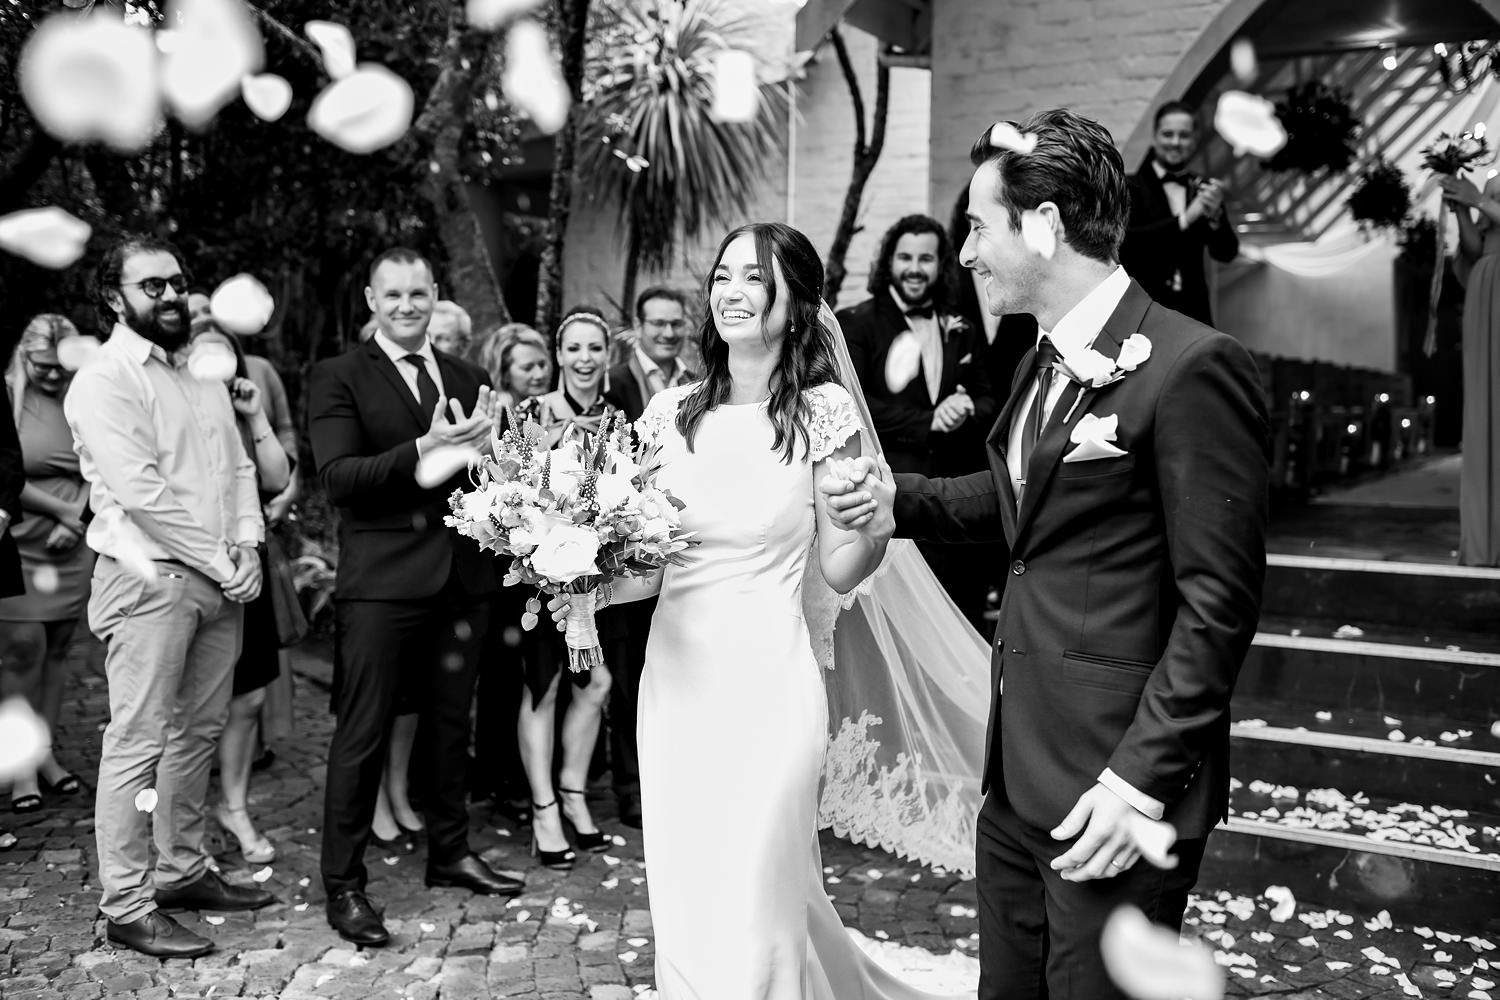 The bride and groom are showered with white rose petals after their wedding ceremony at The Plantation, captured by wedding photographer in South Africa, Niki M Photography